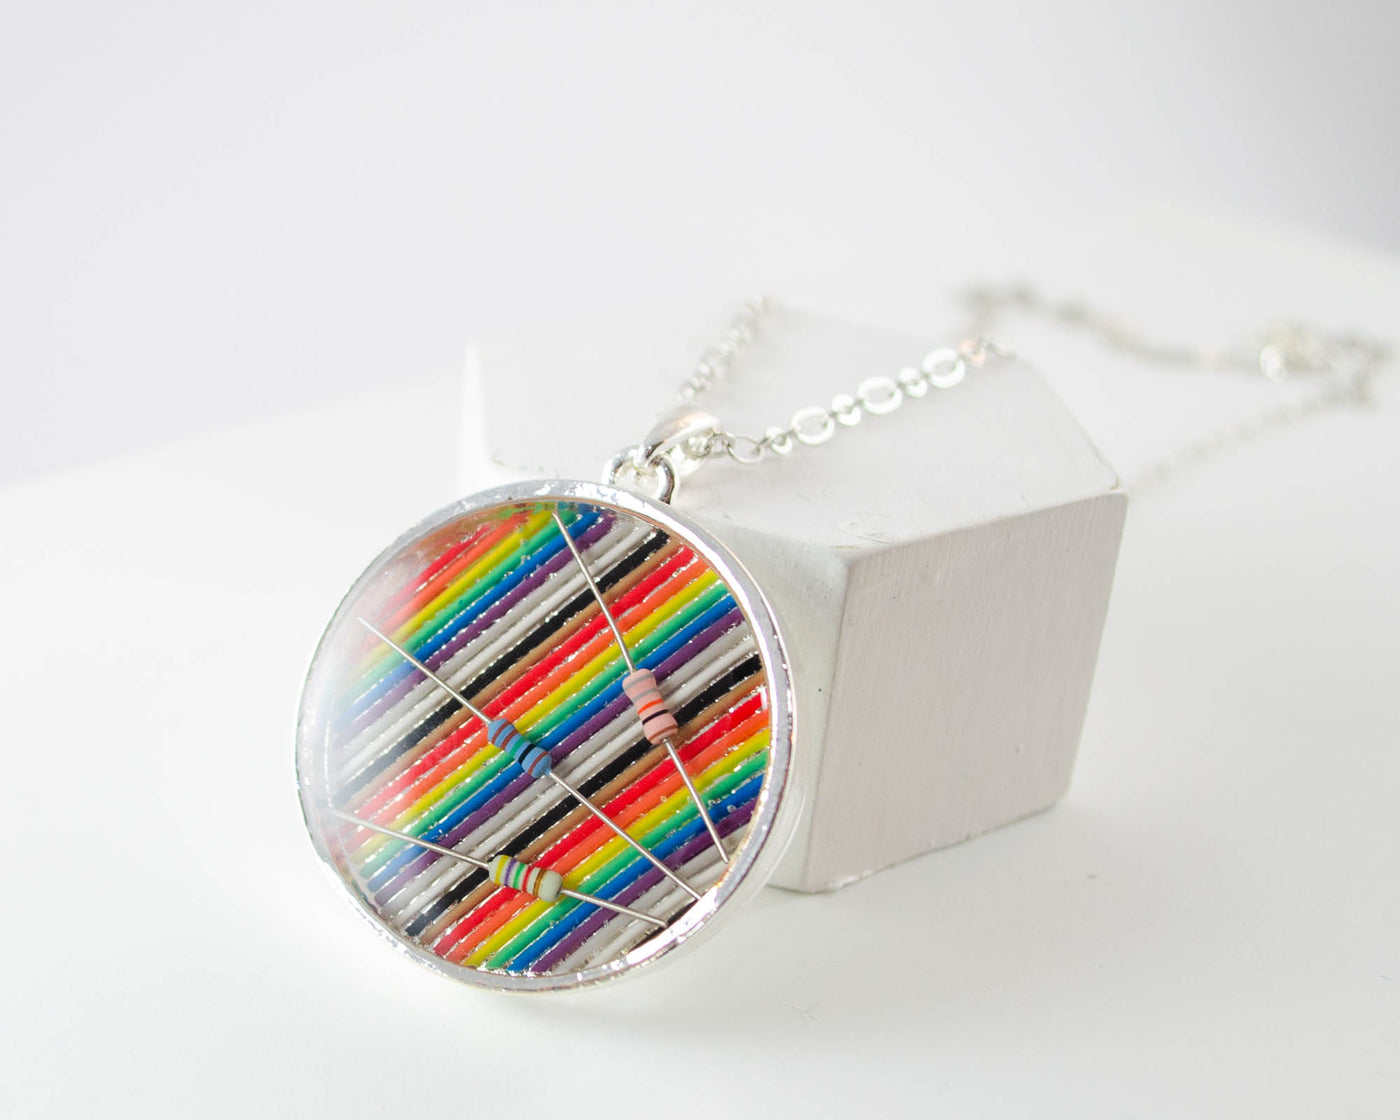 Giant Ribbon Cable & Resistors Necklace